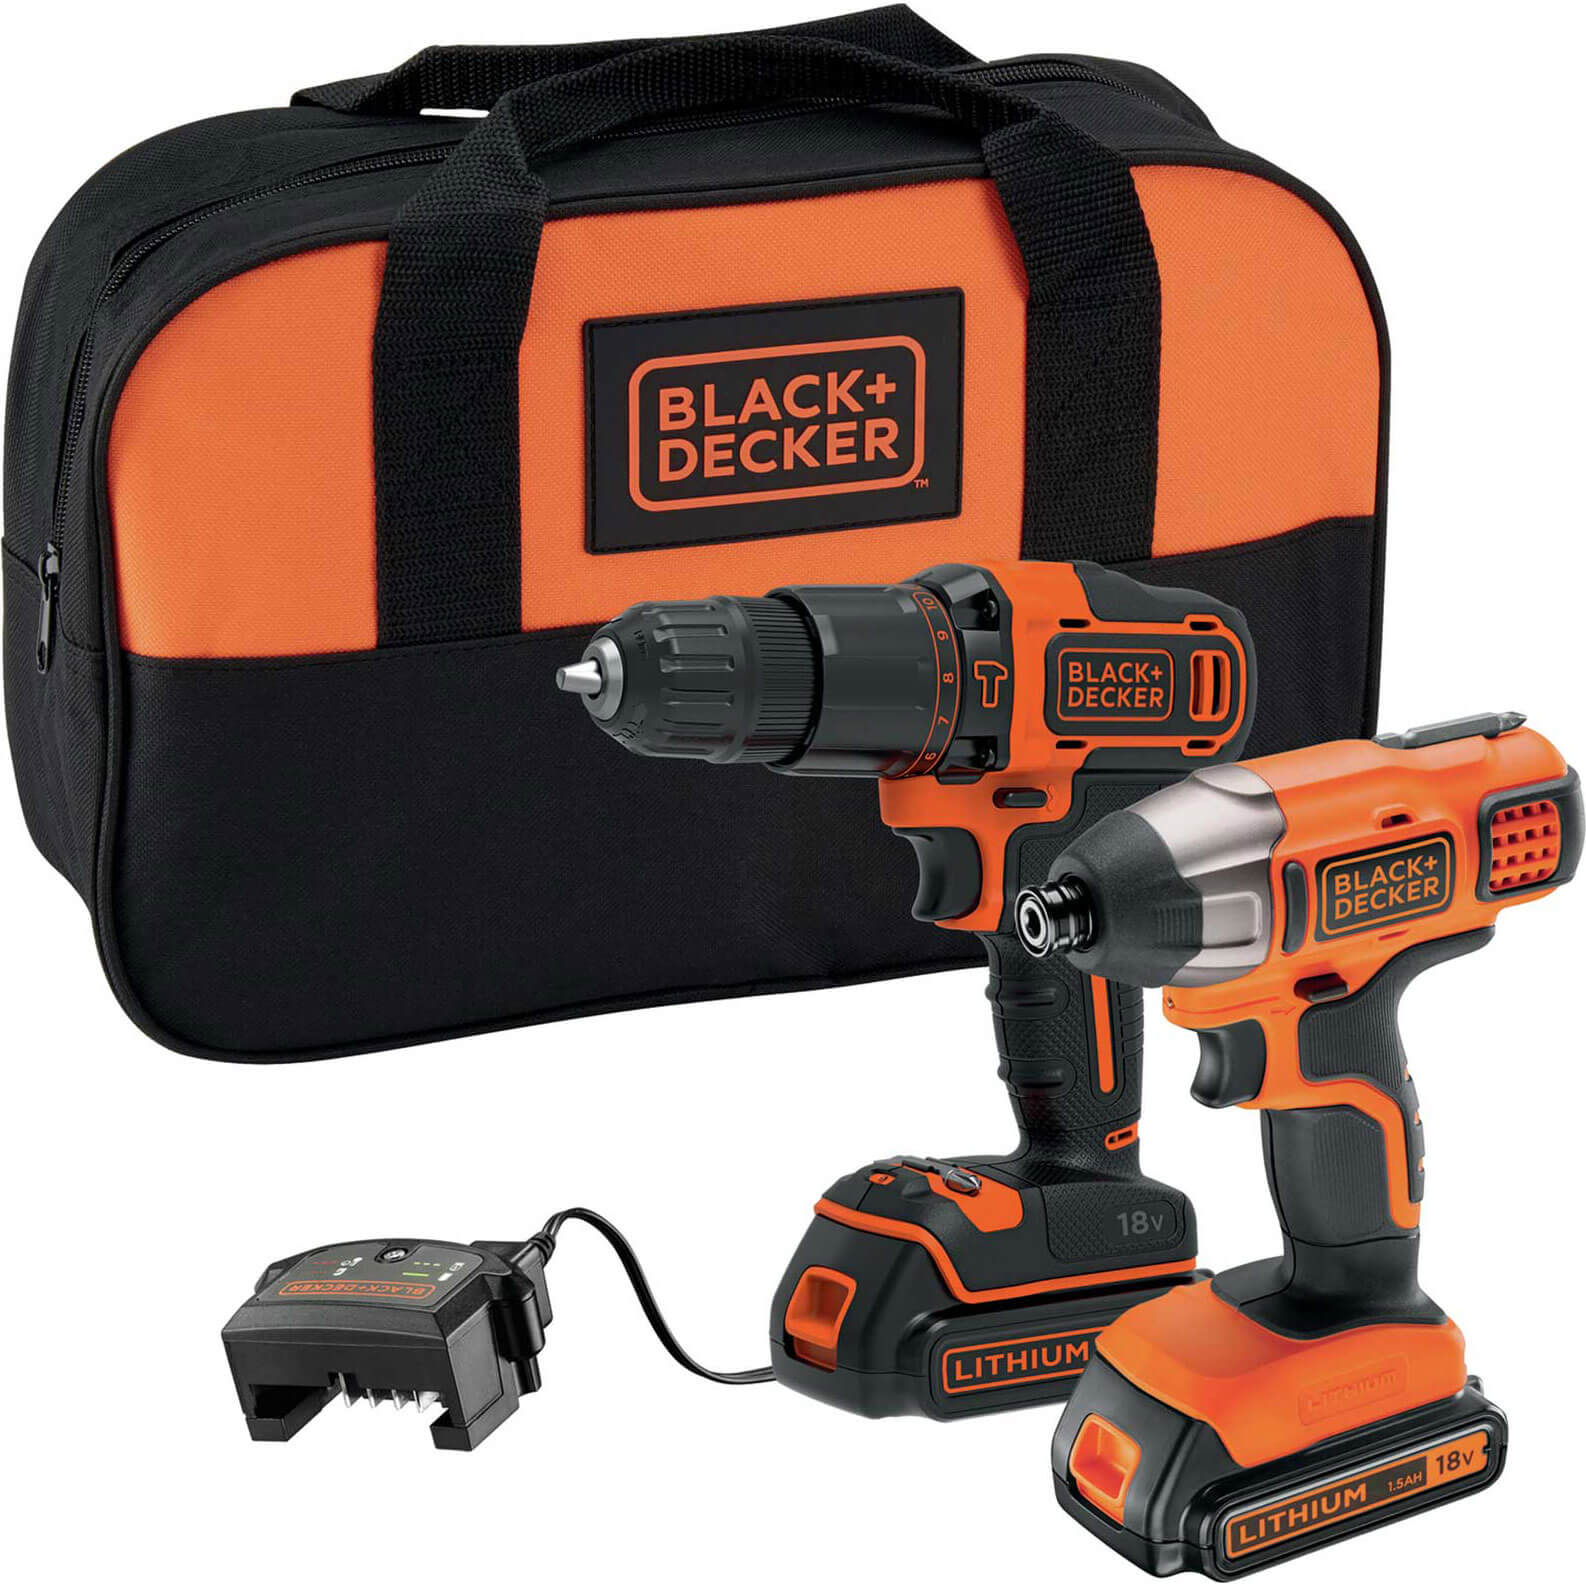 Image of Black and Decker BCK25S2S 18v Cordless Combi Drill and Impact Driver Kit 2 x 1.5ah Li-ion Charger Bag